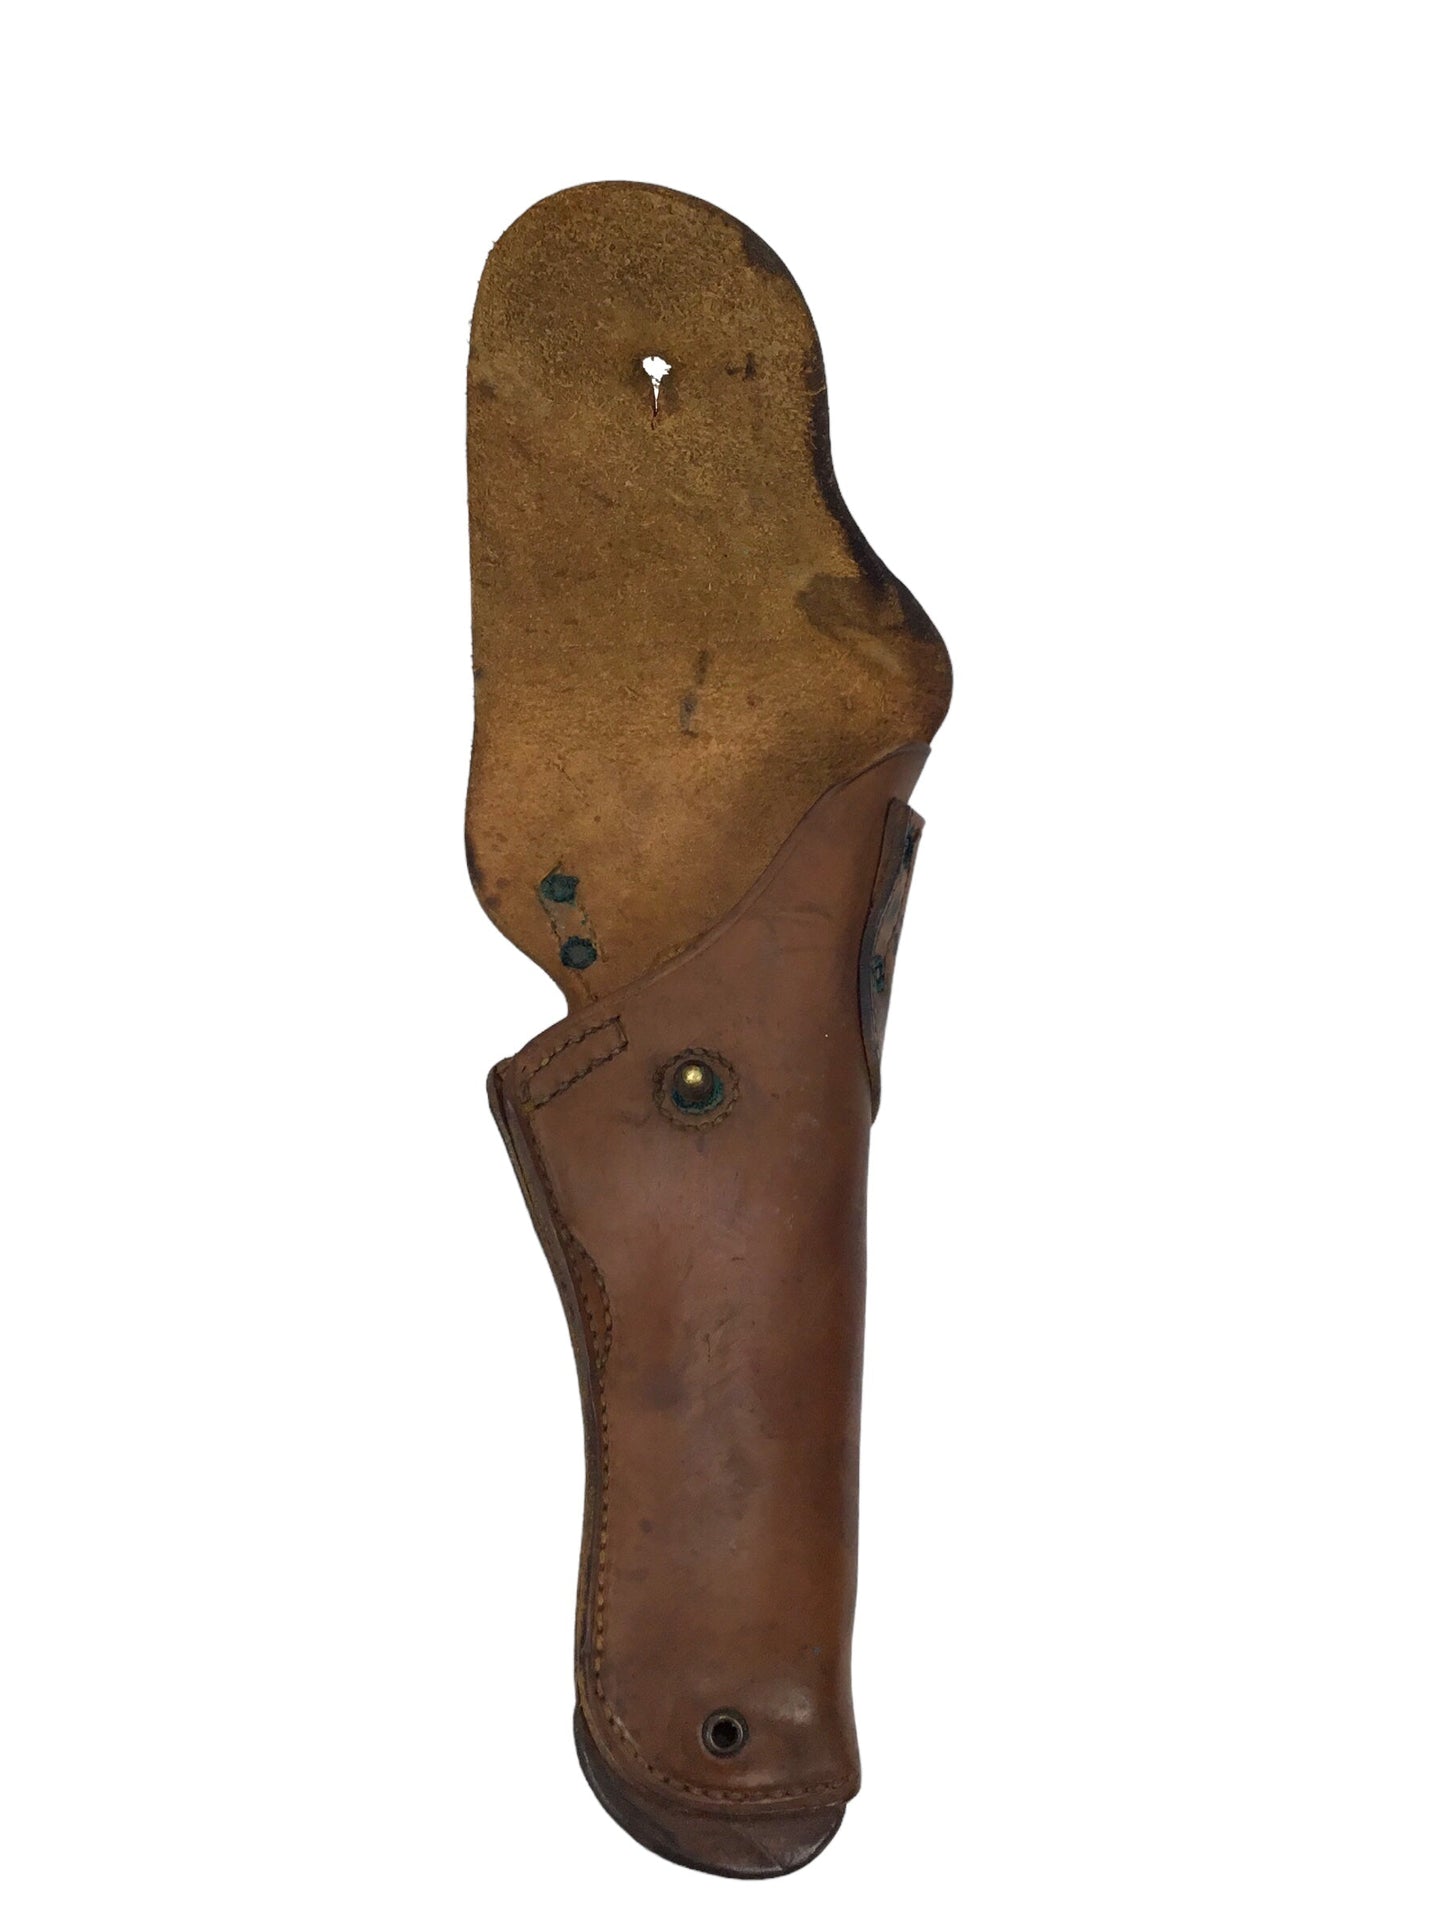 U.S. WWII leather pistol holster marked "U.S." on flap, further marked "Milwaukee Saddlery Co., 1942"